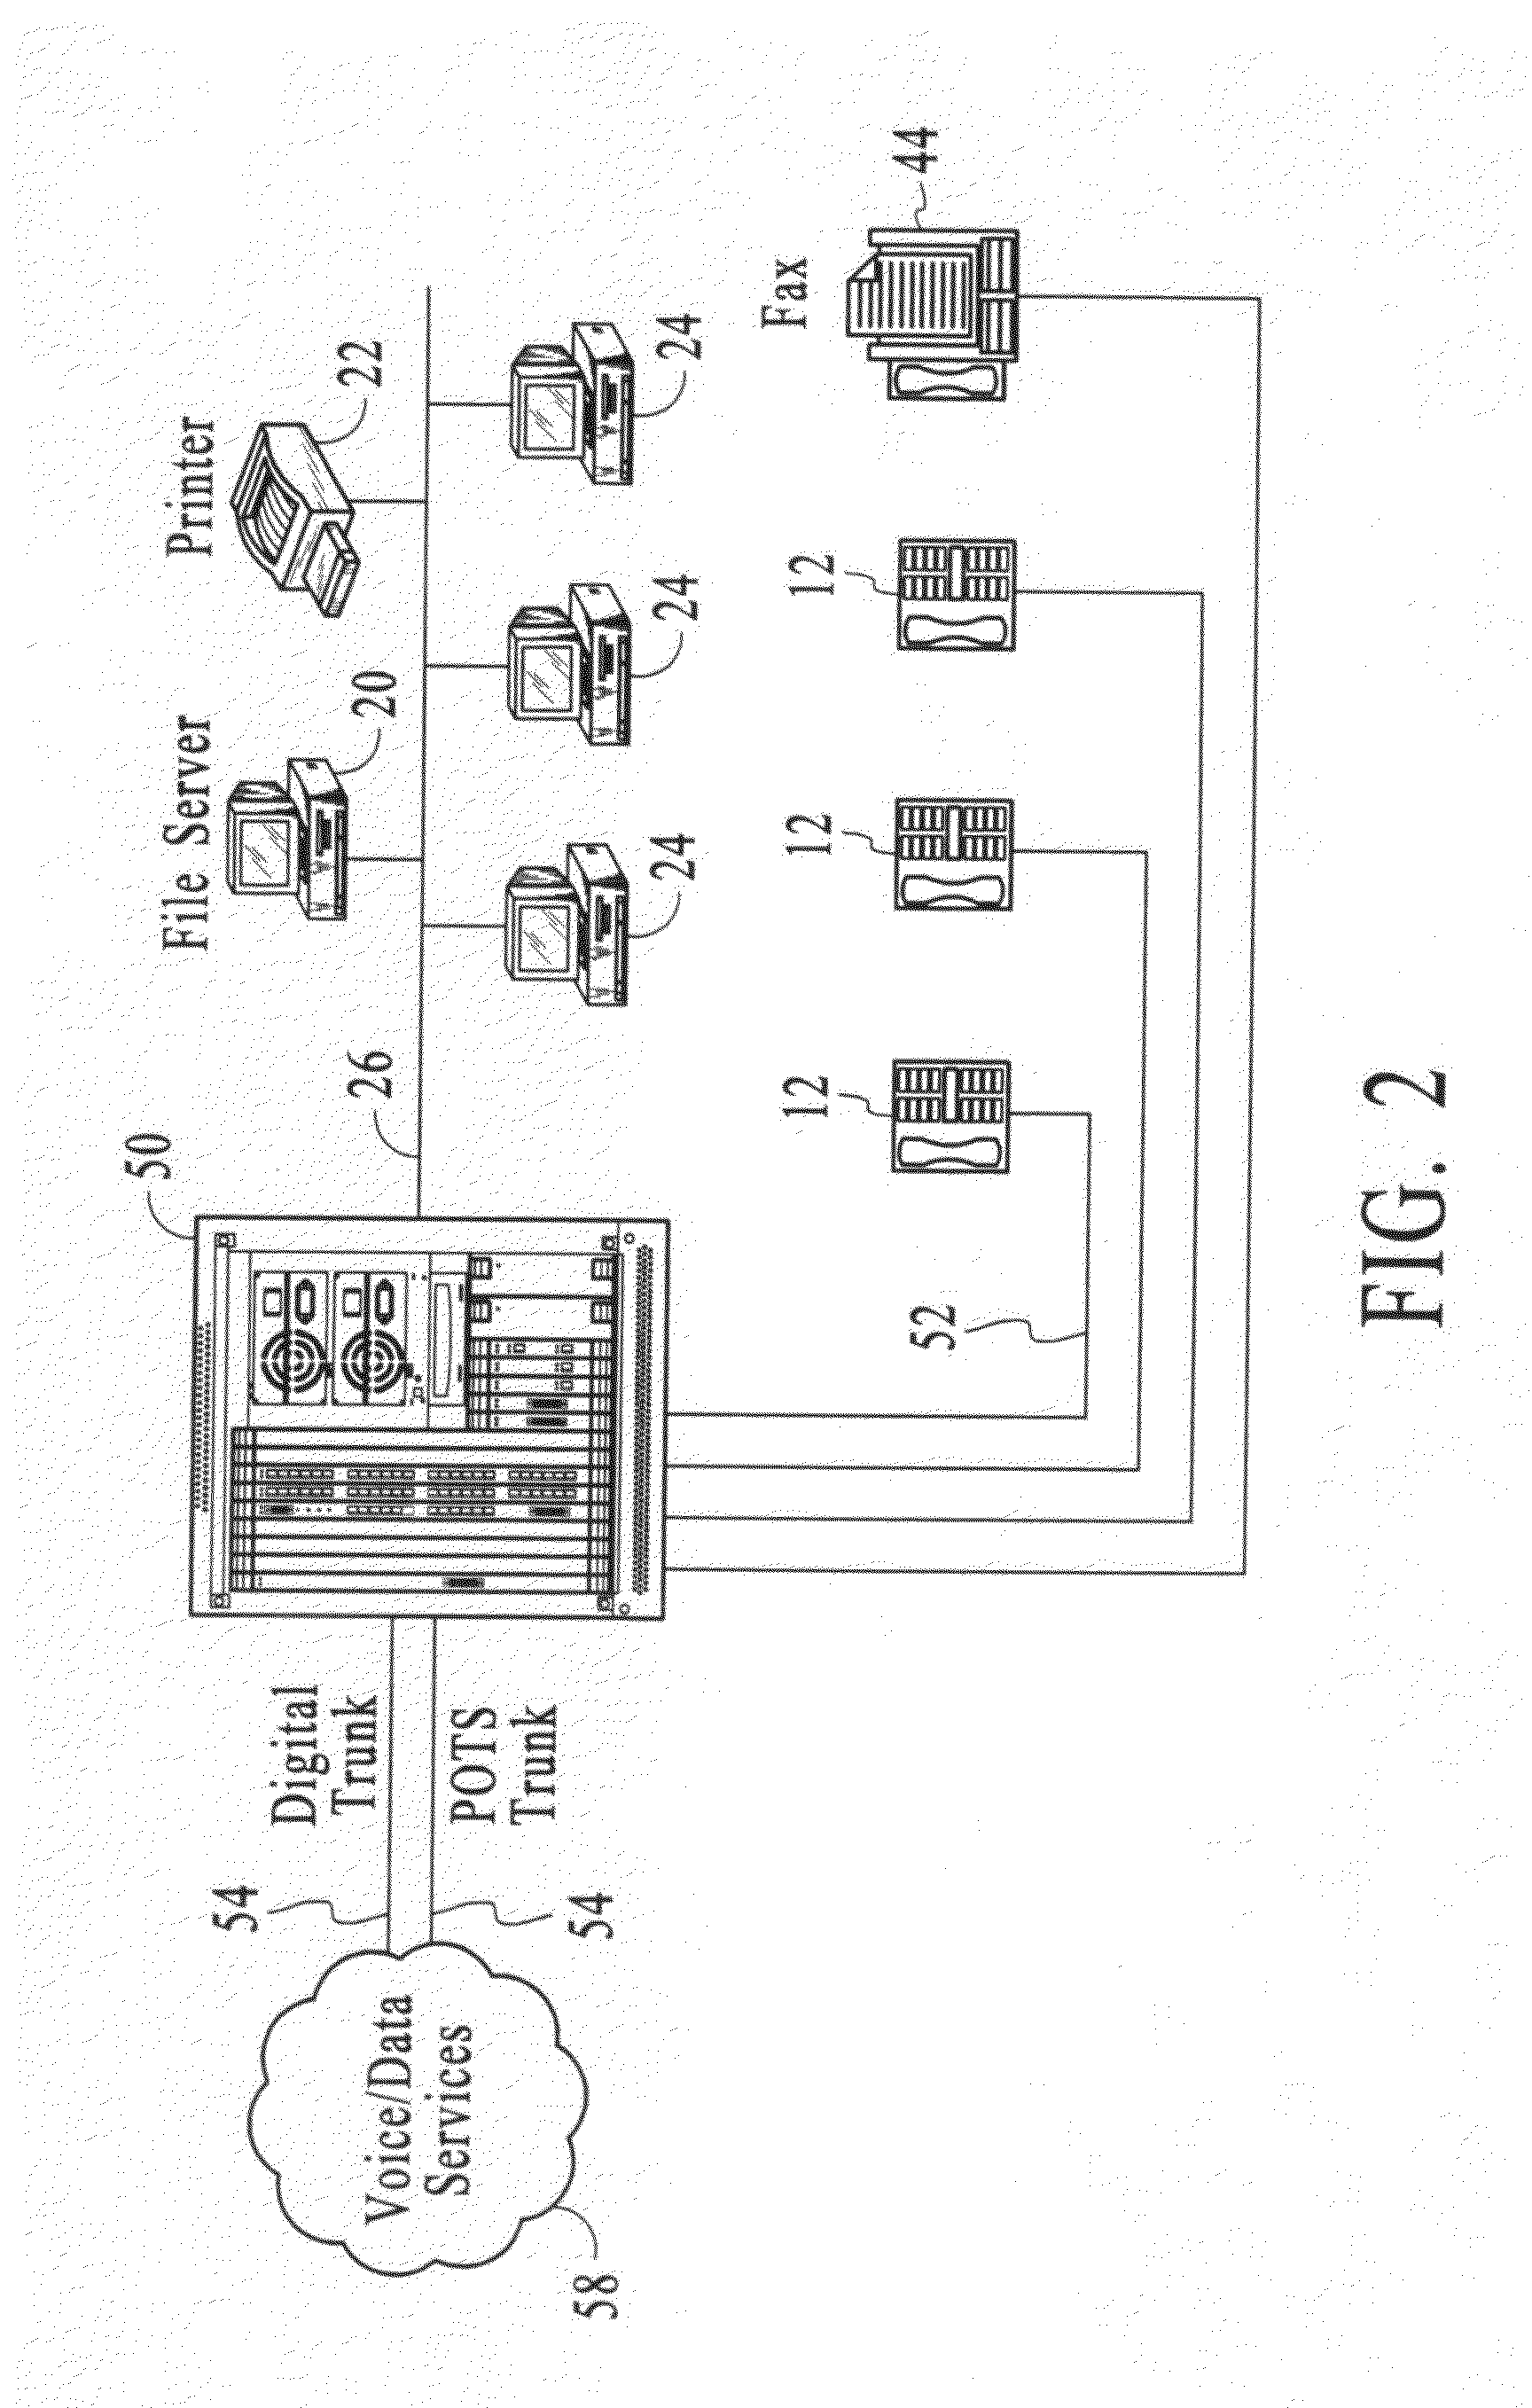 Systems and methods for voice and data communications including a network drop and insert interface for an external data routing resource